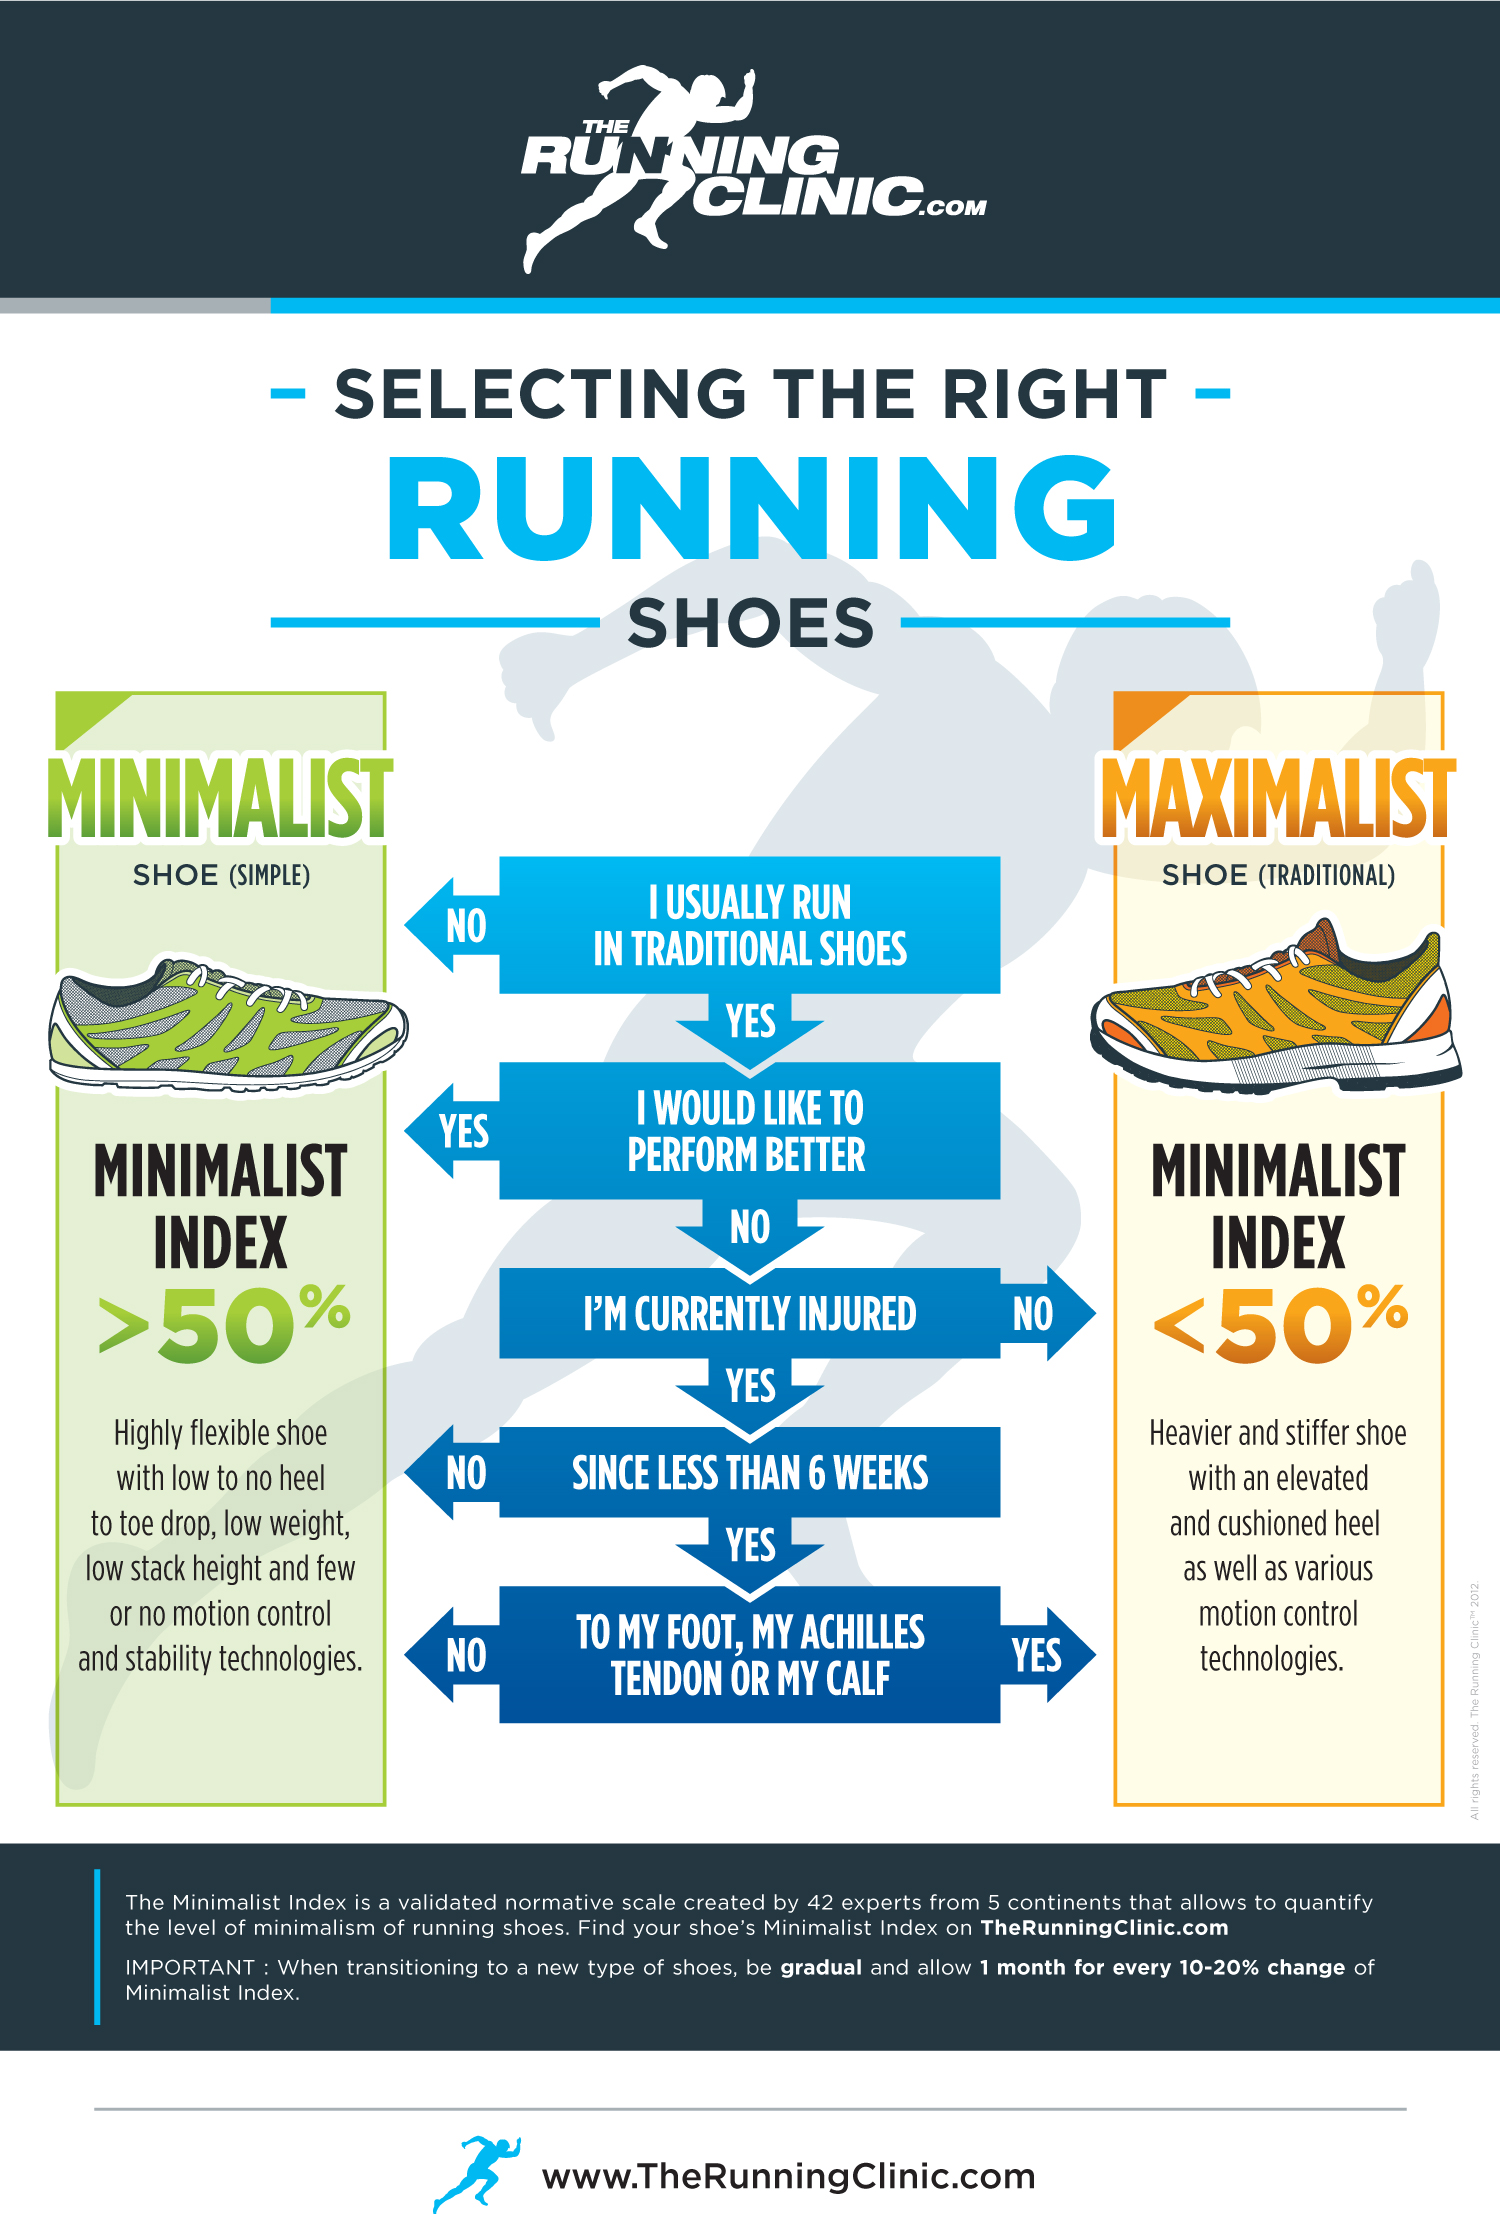 How Should Running Shoes Fit? A Guide To Finding The Ideal Shoe